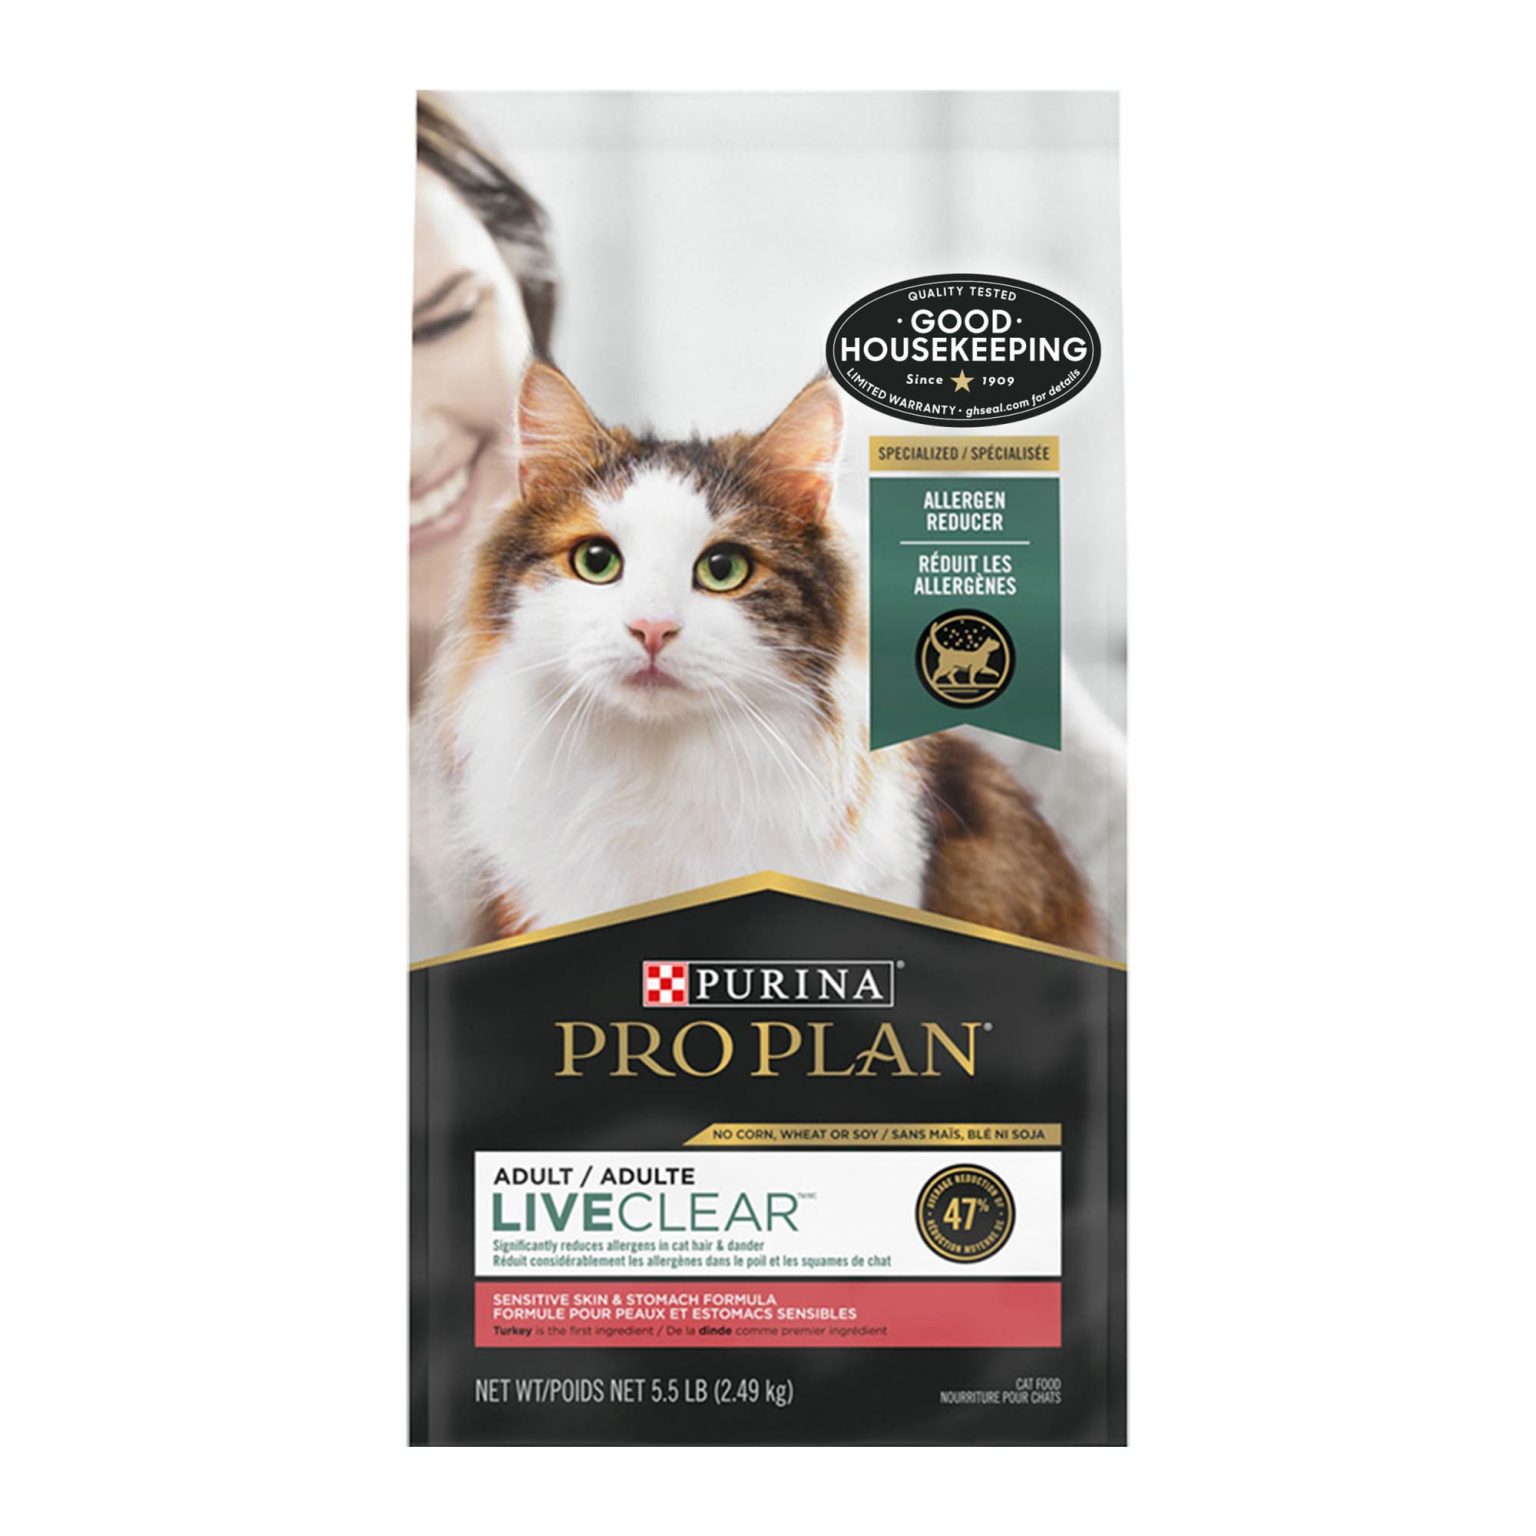 Purina Pro Plan High Protein LiveClear Sensitive Skin & Stomach Turkey